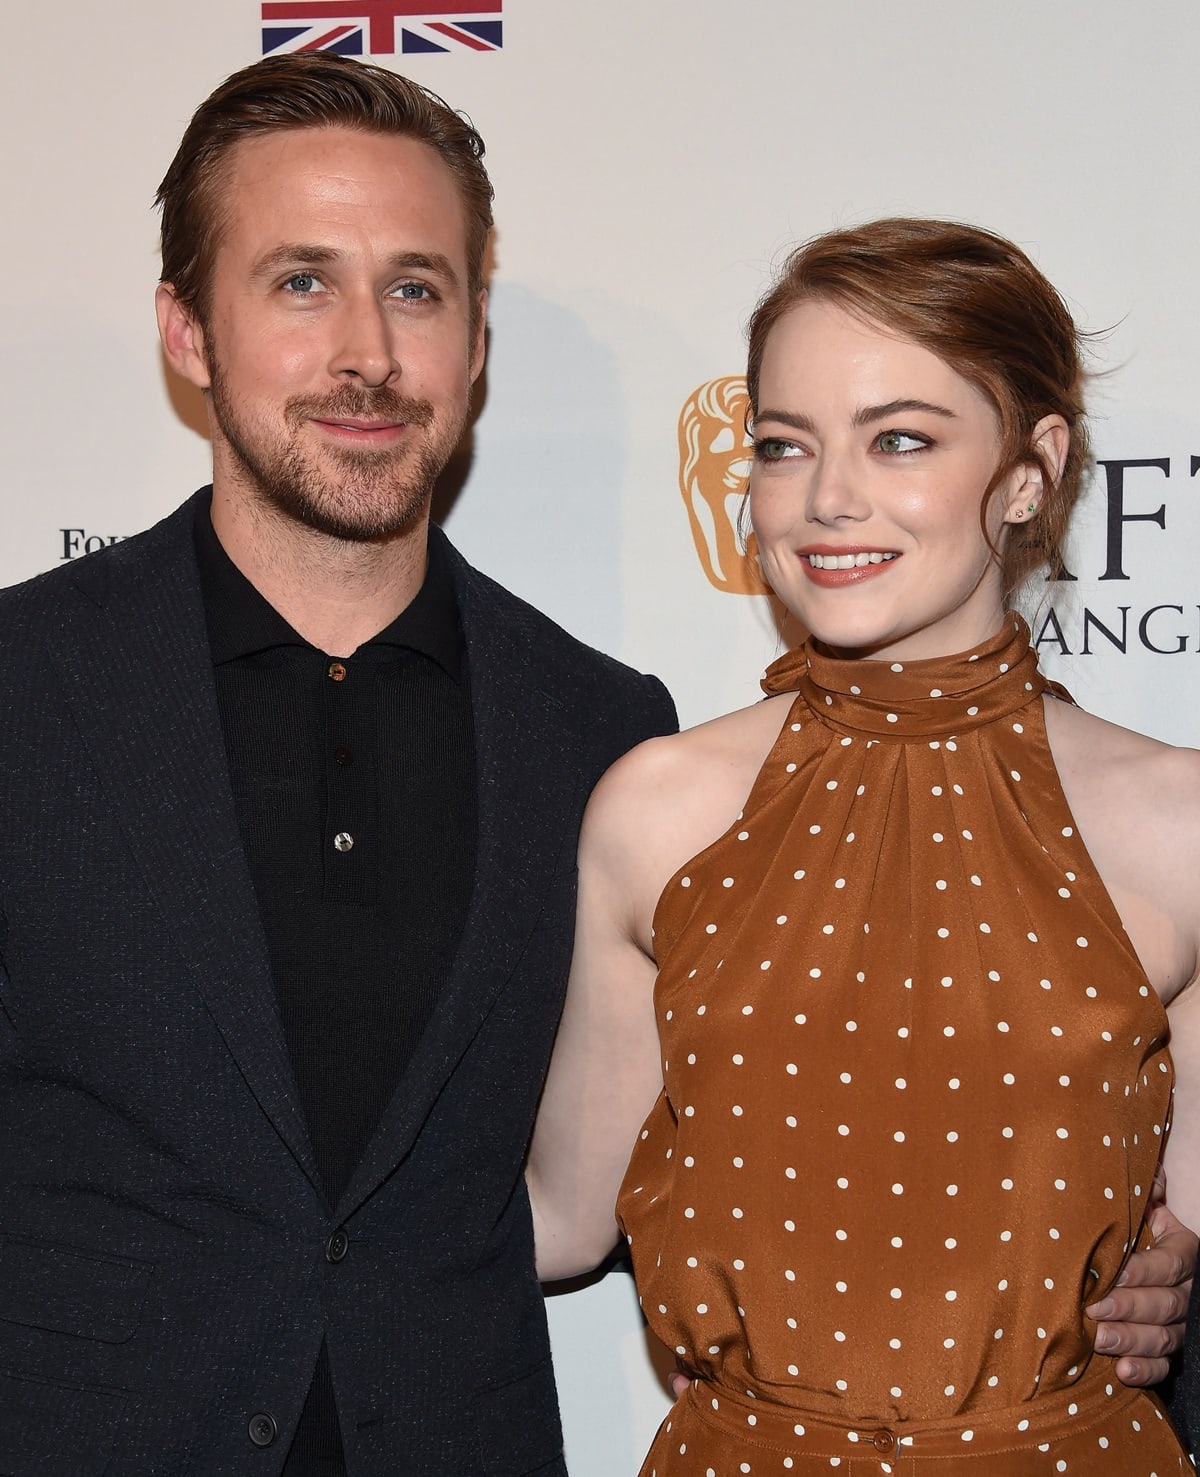 Ryan Gosling is taller than Emma Stone by approximately 9.5 inches (15.9 cm), with him standing at 6 feet ¼ inch (183.5 cm) and her at 5 feet 6 inches (167.6 cm)